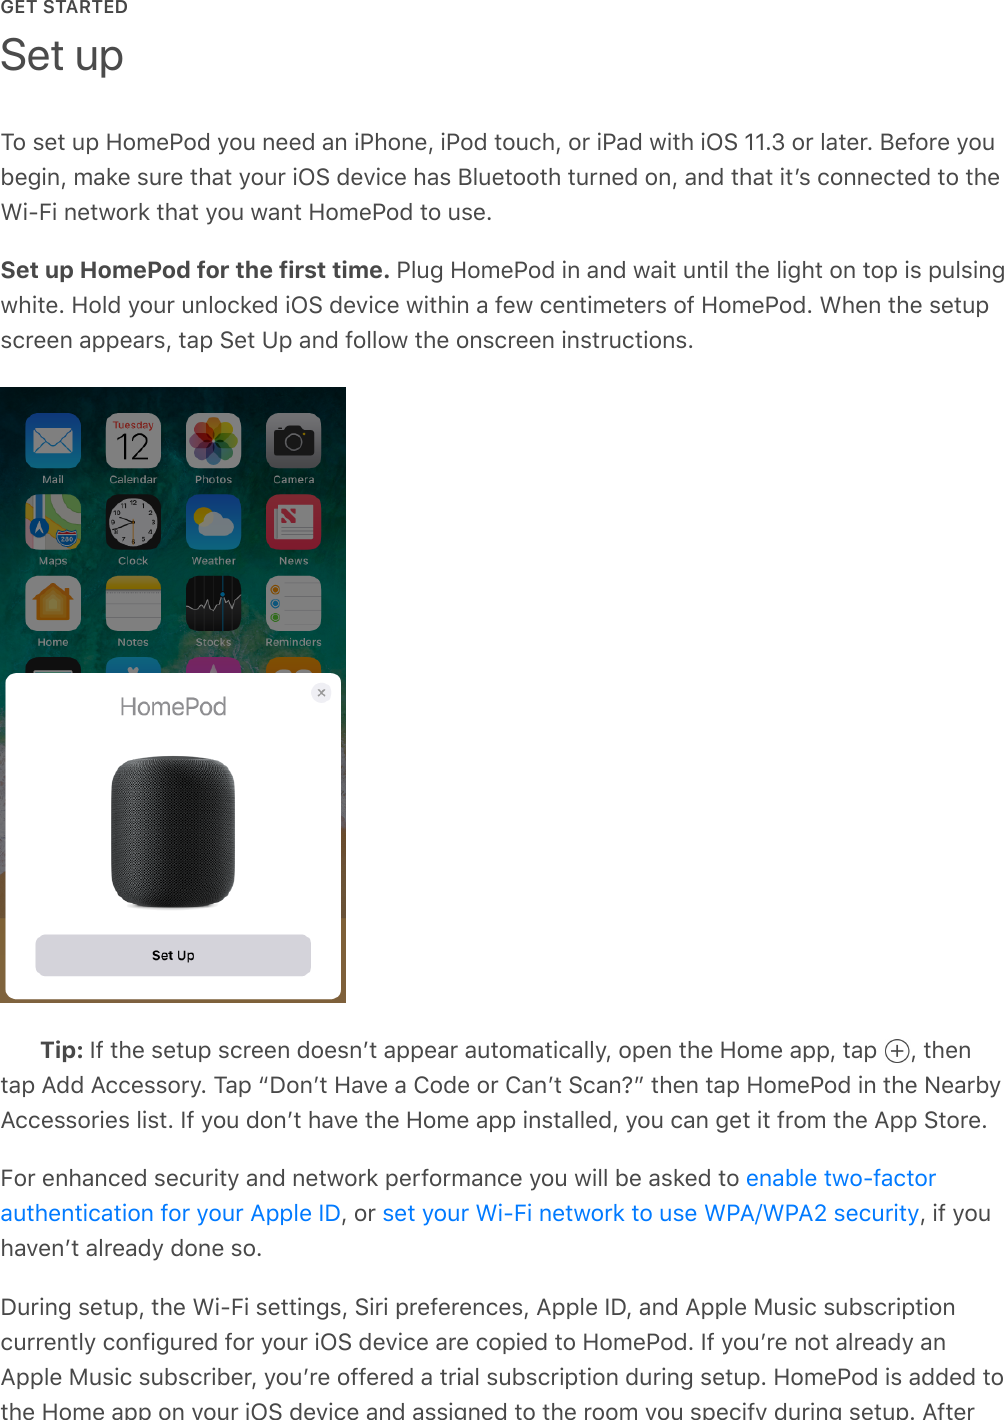 GET STARTEDTo set up HomePod you need an iPhone, iPod touch, or iPad with iOS 11.3 or later. Before youbegin, make sure that your iOS device has Bluetooth turned on, and that itʼs connected to theWi-Fi network that you want HomePod to use.Set up HomePod for the first time. Plug HomePod in and wait until the light on top is pulsingwhite. Hold your unlocked iOS device within a few centimeters of HomePod. When the setupscreen appears, tap Set Up and follow the onscreen instructions.Tip: If the setup screen doesnʼt appear automatically, open the Home app, tap  , thentap Add Accessory. Tap “Donʼt Have a Code or Canʼt Scan?” then tap HomePod in the NearbyAccessories list. If you donʼt have the Home app installed, you can get it from the App Store.For enhanced security and network performance you will be asked to , or  , if youhavenʼt already done so.During setup, the Wi-Fi settings, Siri preferences, Apple ID, and Apple Music subscriptioncurrently configured for your iOS device are copied to HomePod. If youʼre not already anApple Music subscriber, youʼre offered a trial subscription during setup. HomePod is added tothe Home app on your iOS device and assigned to the room you specify during setup. AfterSet upenable two-factorauthentication for your Apple ID set your Wi-Fi network to use WPA/WPA2 security